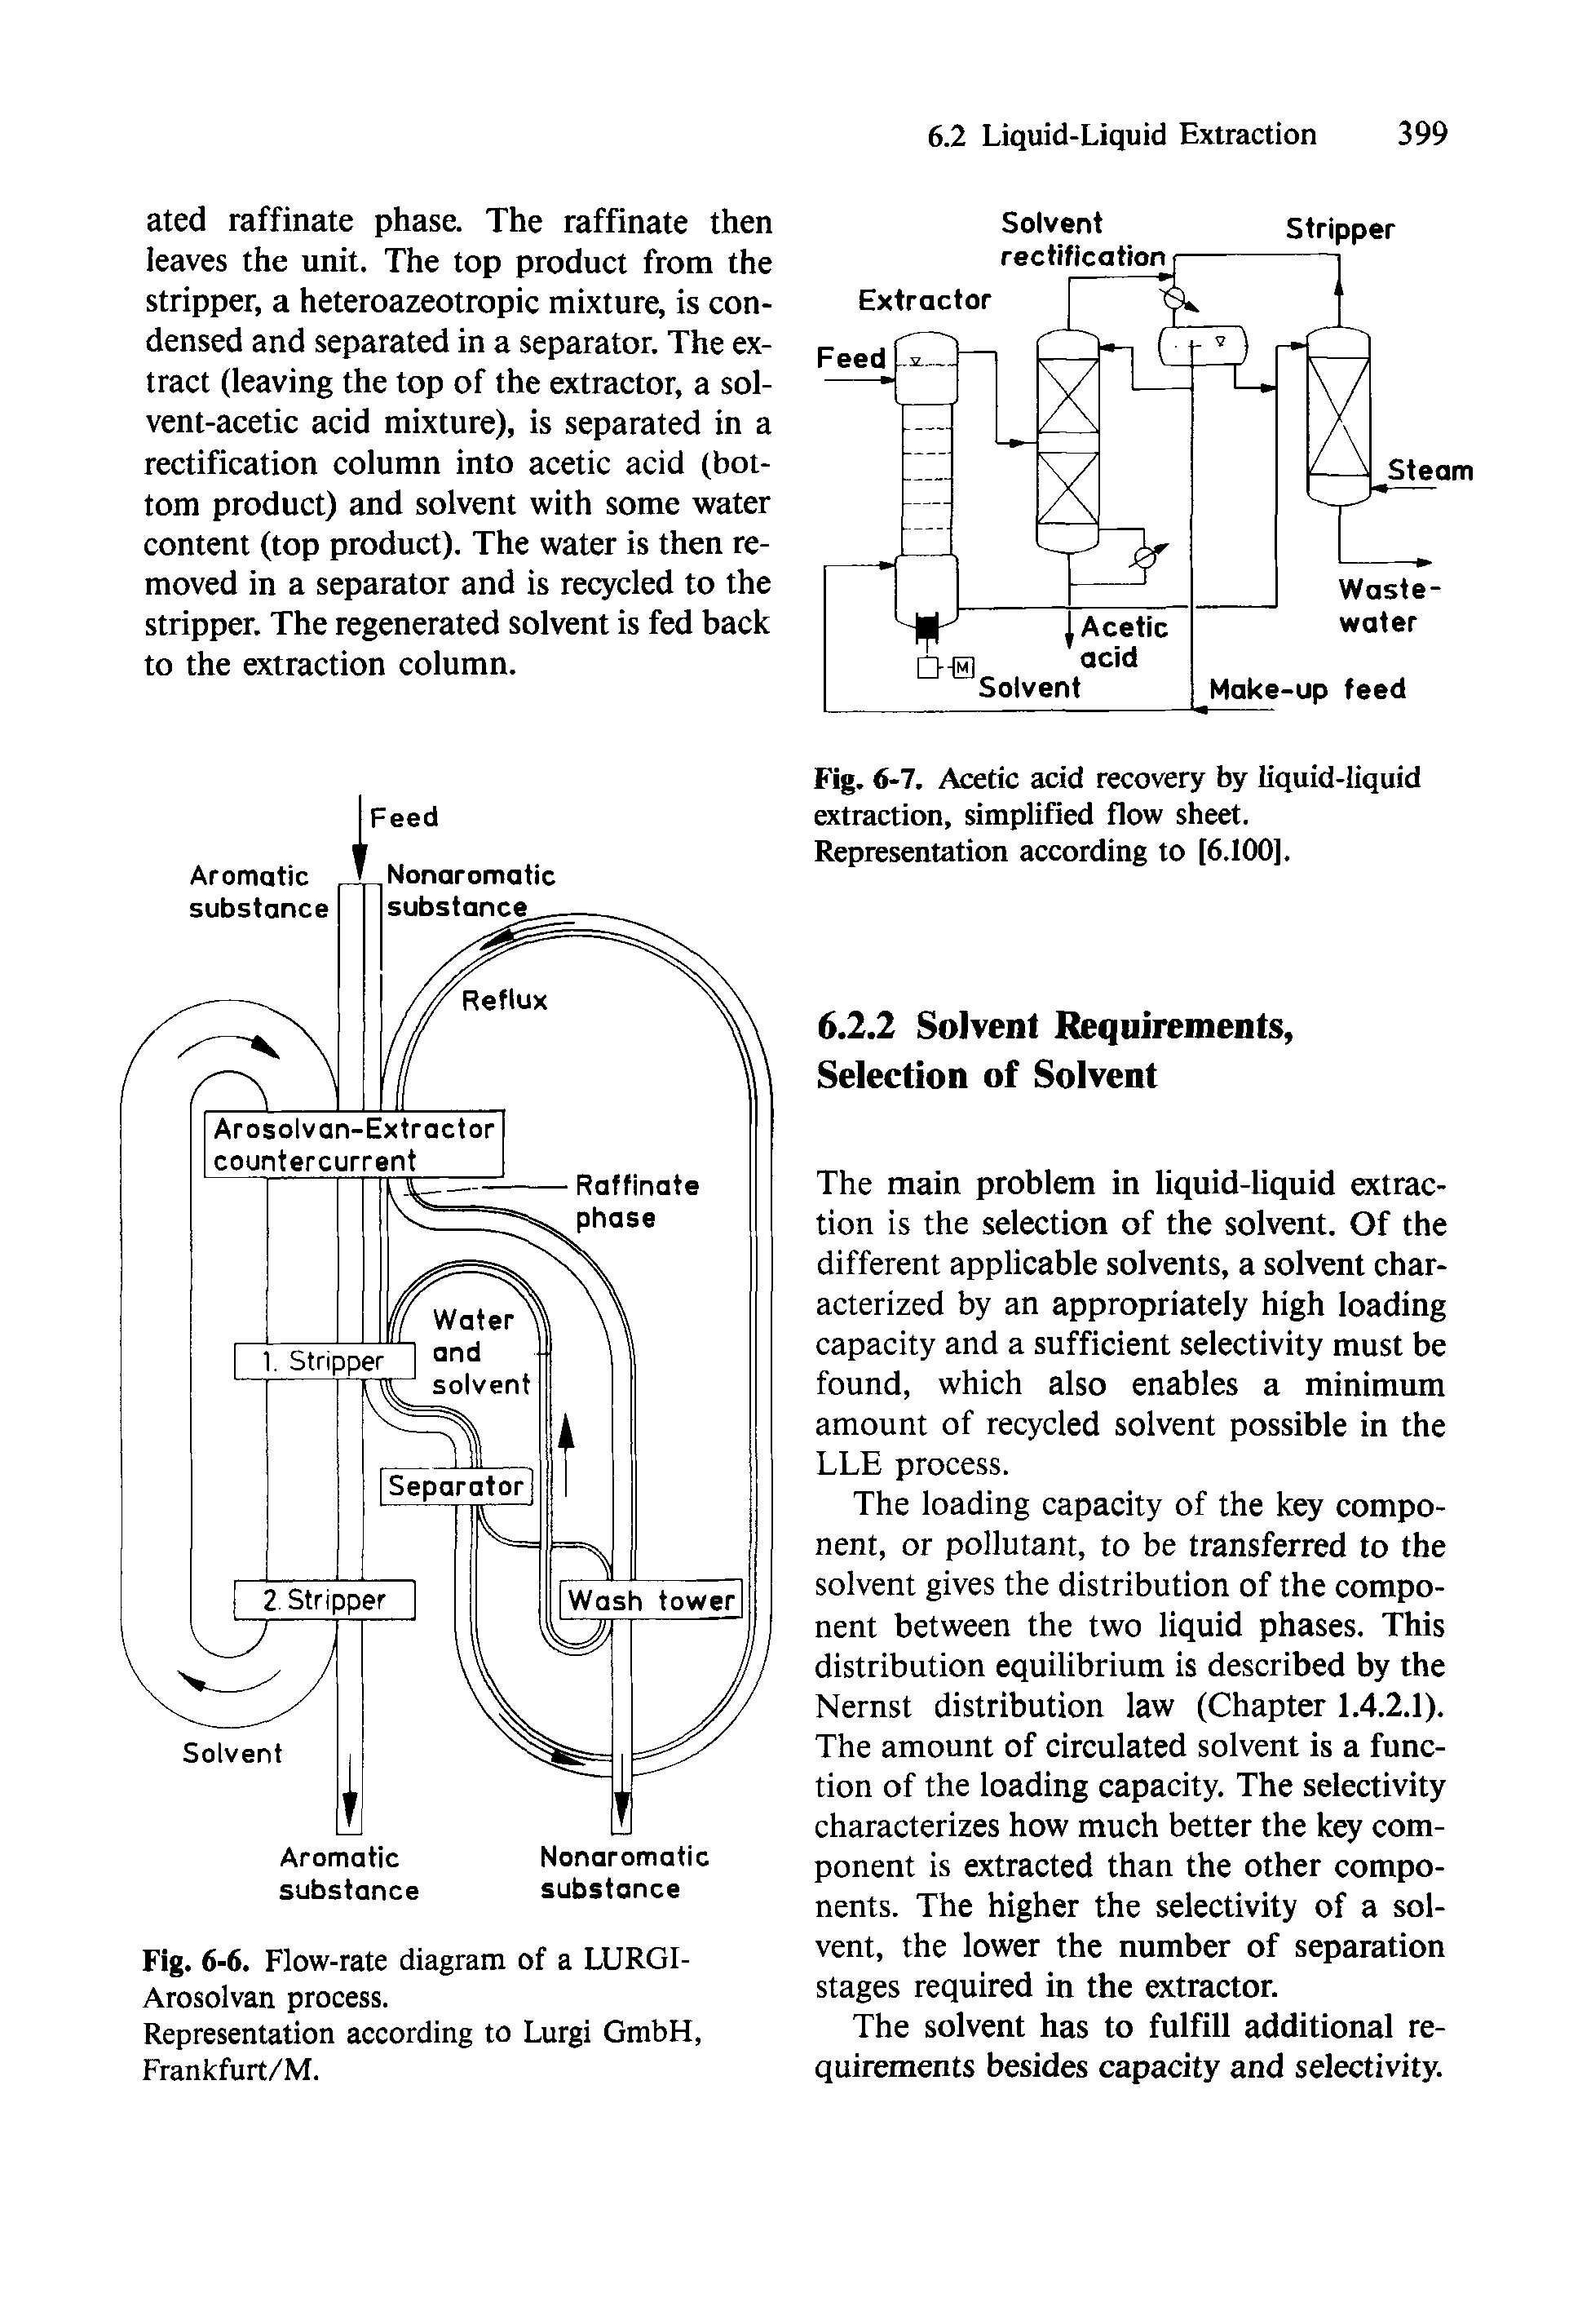 Fig. 6-7, Acetic acid recovery by liquid-liquid extraction, simplified flow sheet. Representation according to [6.100].